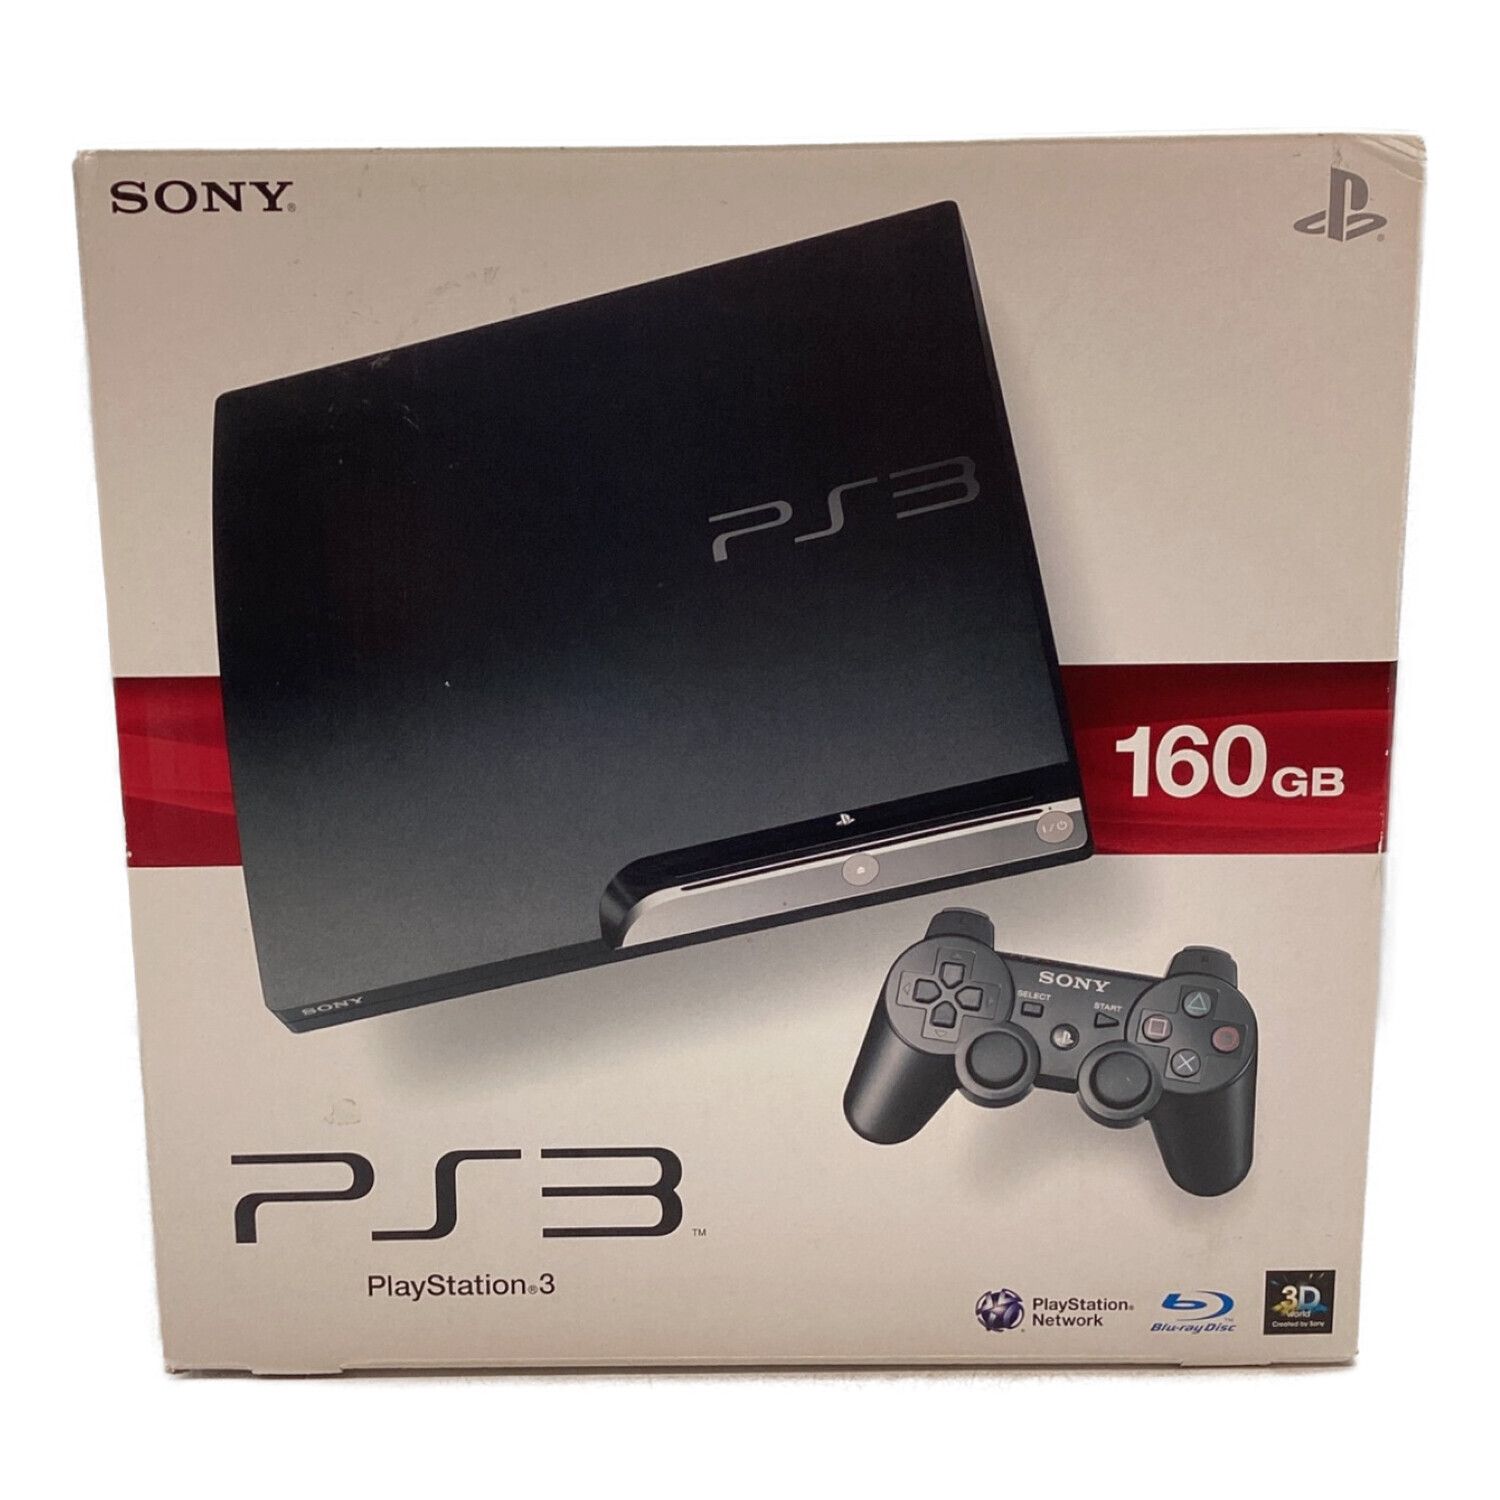 SONY (ソニー) PlayStation3 ジャンク品 CECH-2500A -｜トレファクONLINE